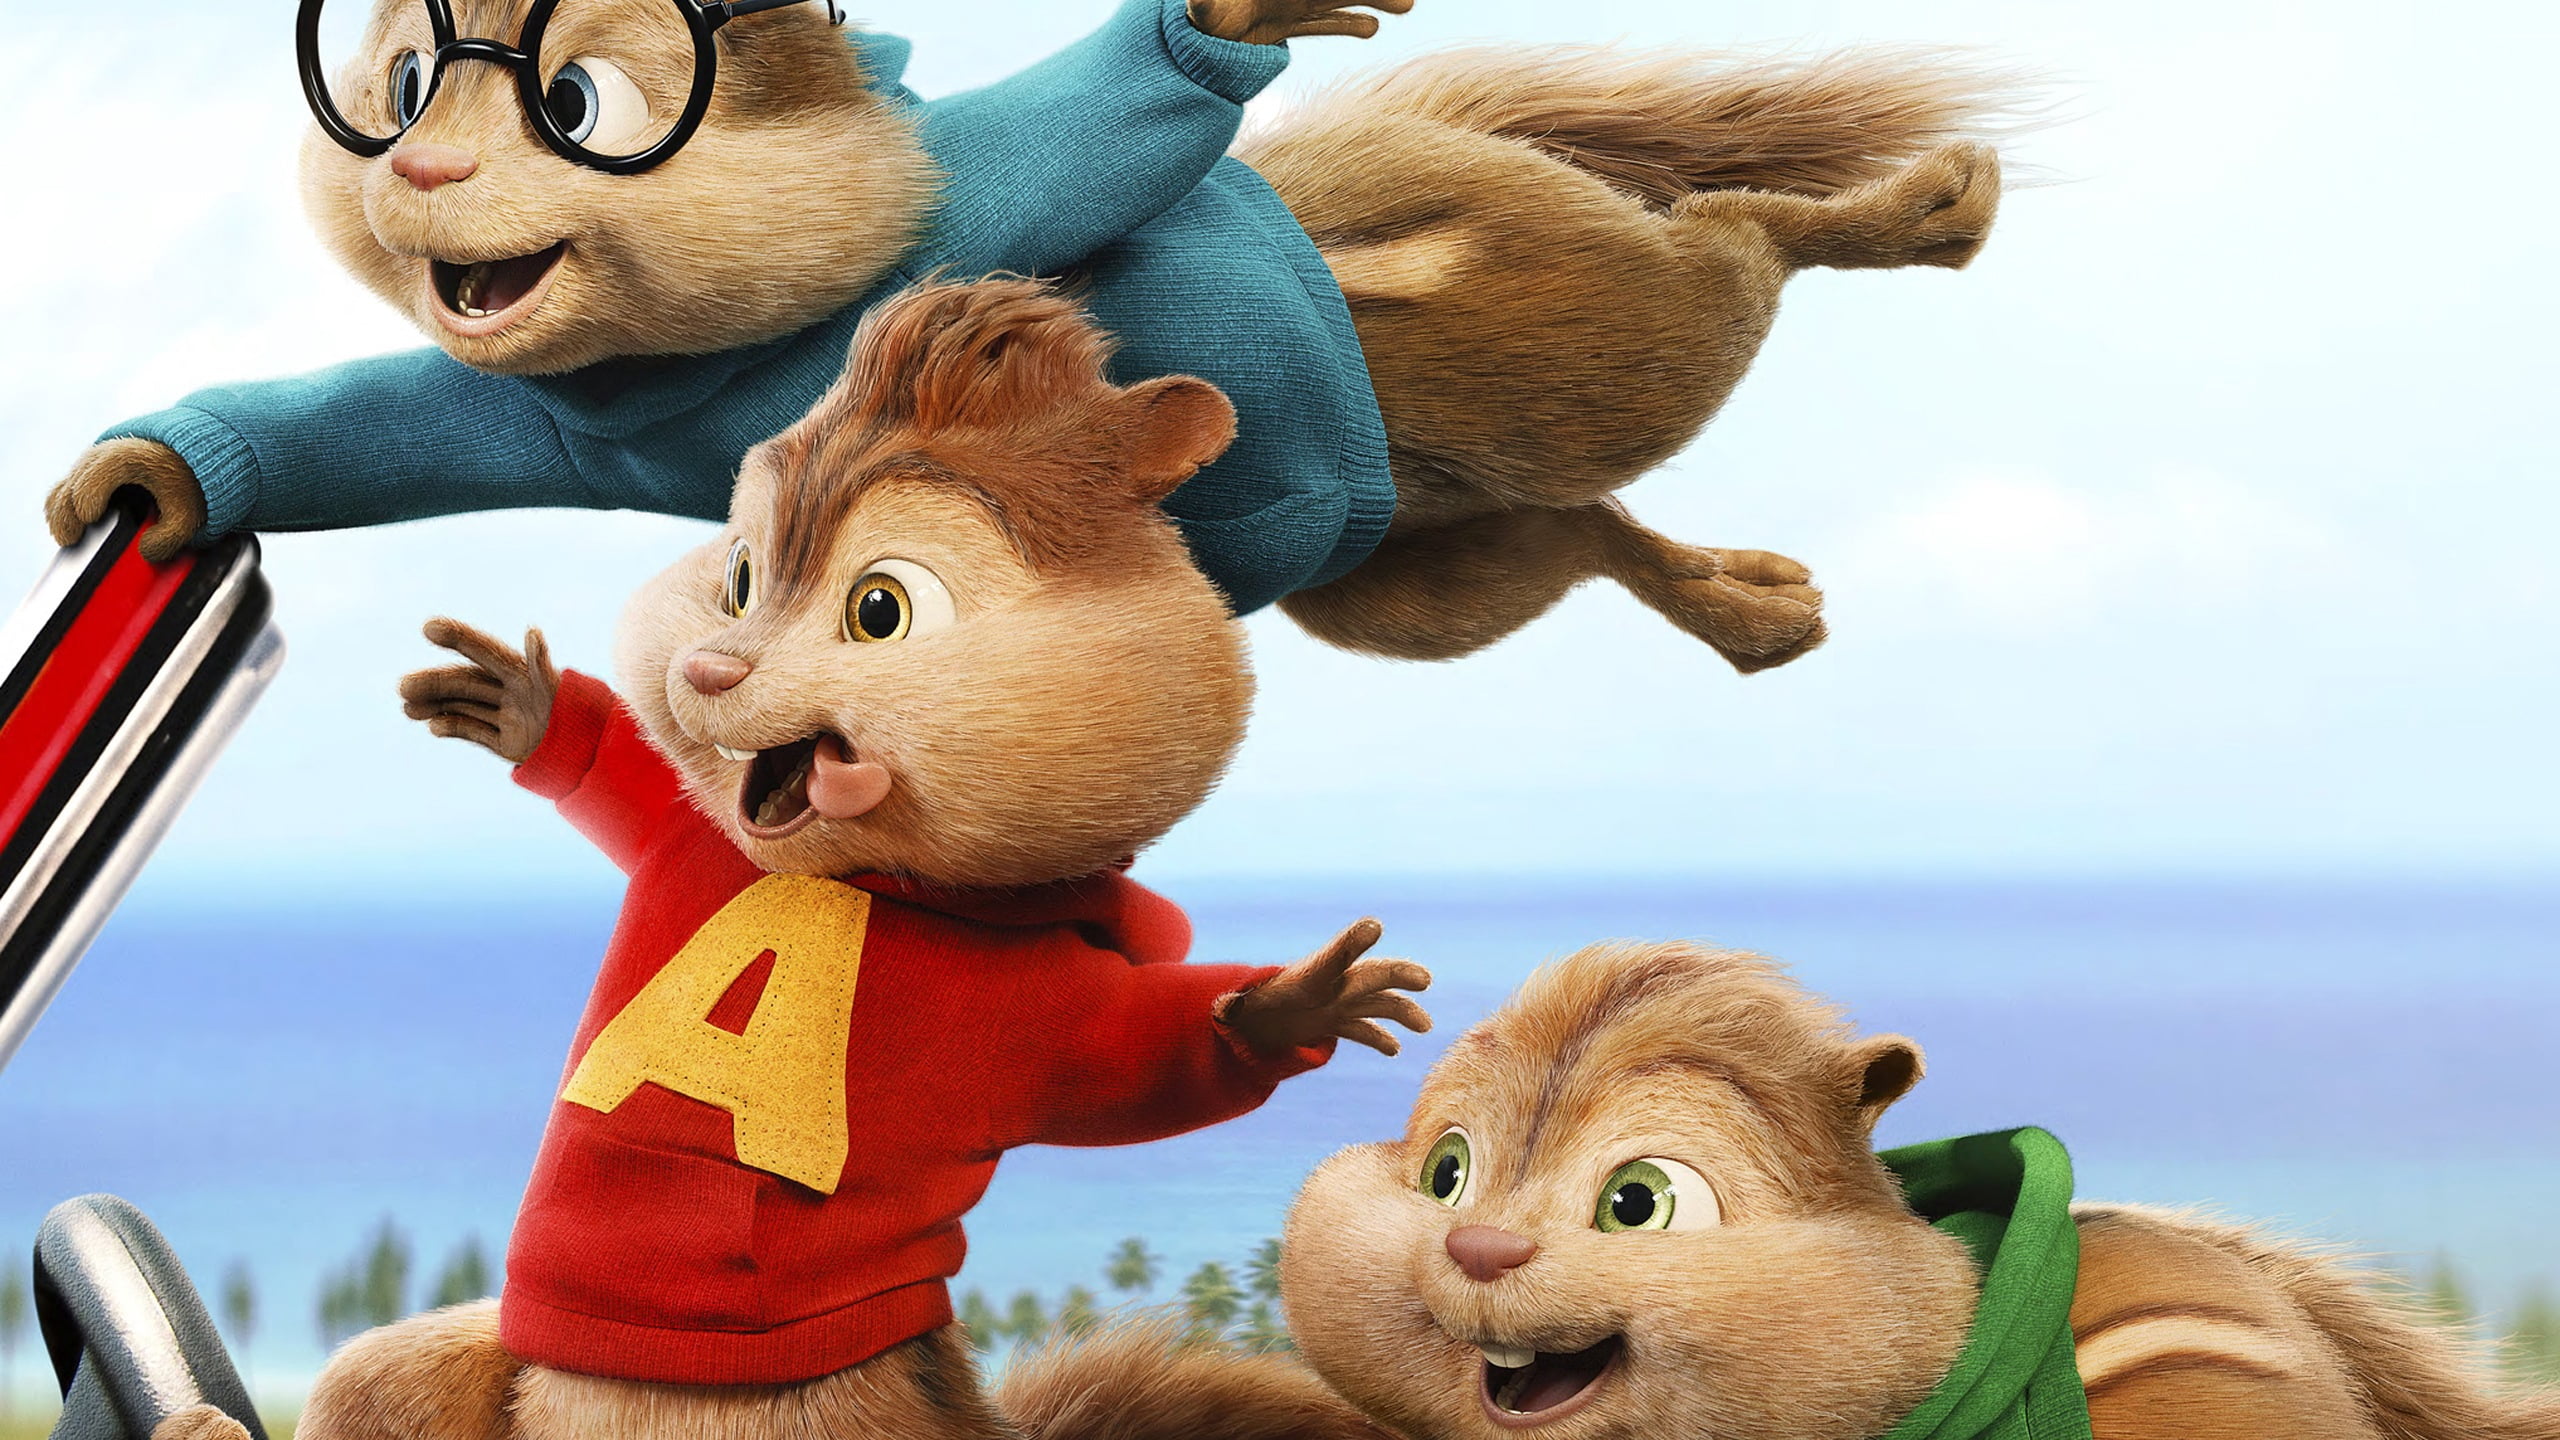 Alvin and the Chipmunks illustration, simon, theodore, the road chip